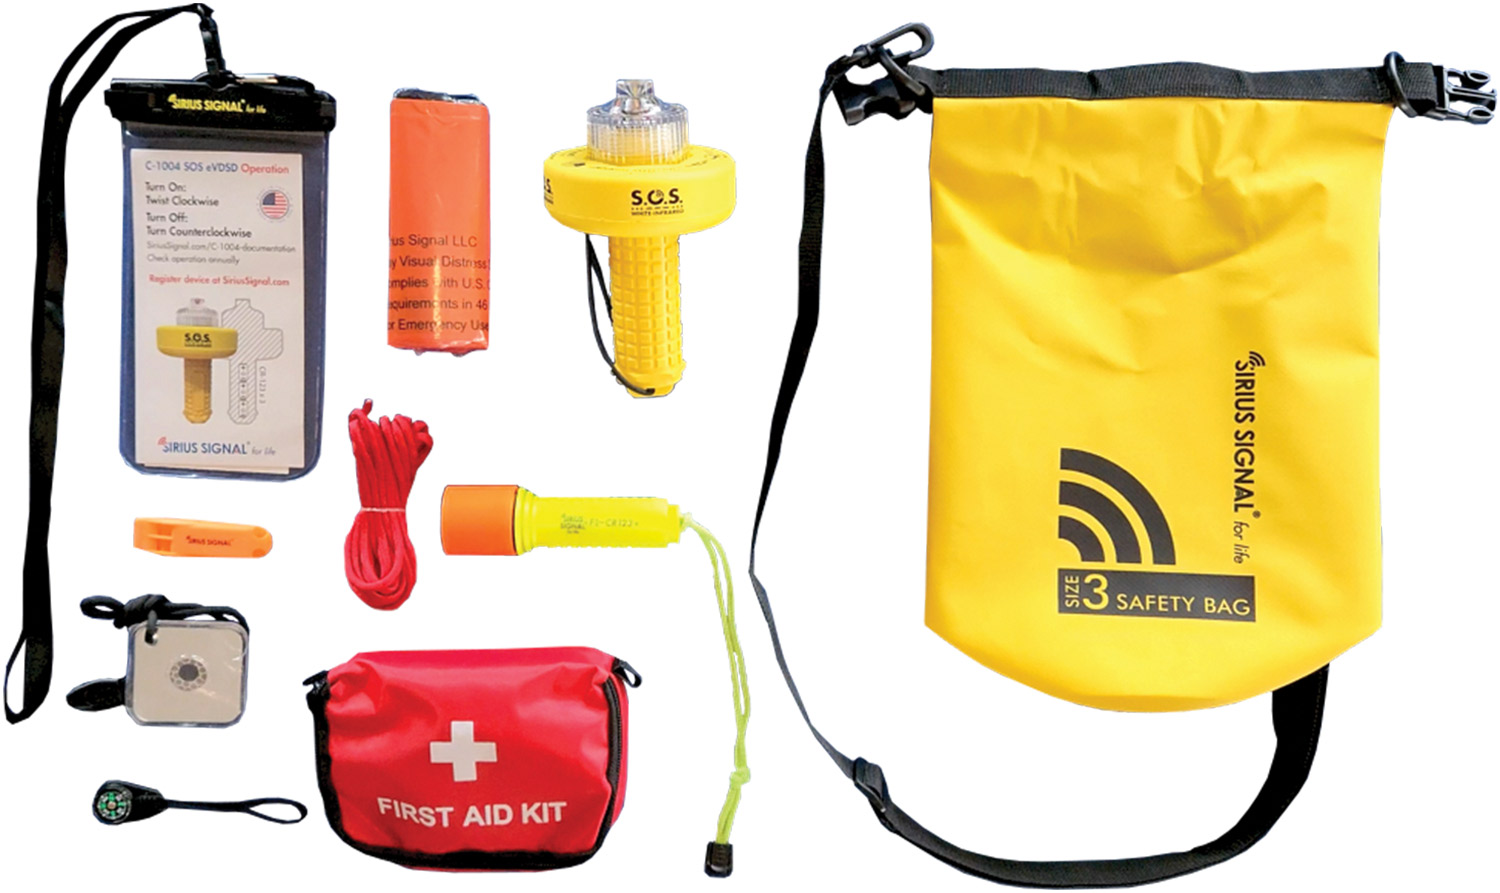 Sirius Signal's Watersports Safety “dry bag” Kit including a lithium battery-powered model C-1004 SOS eVDSD and floating flashlight, and a first aid kit